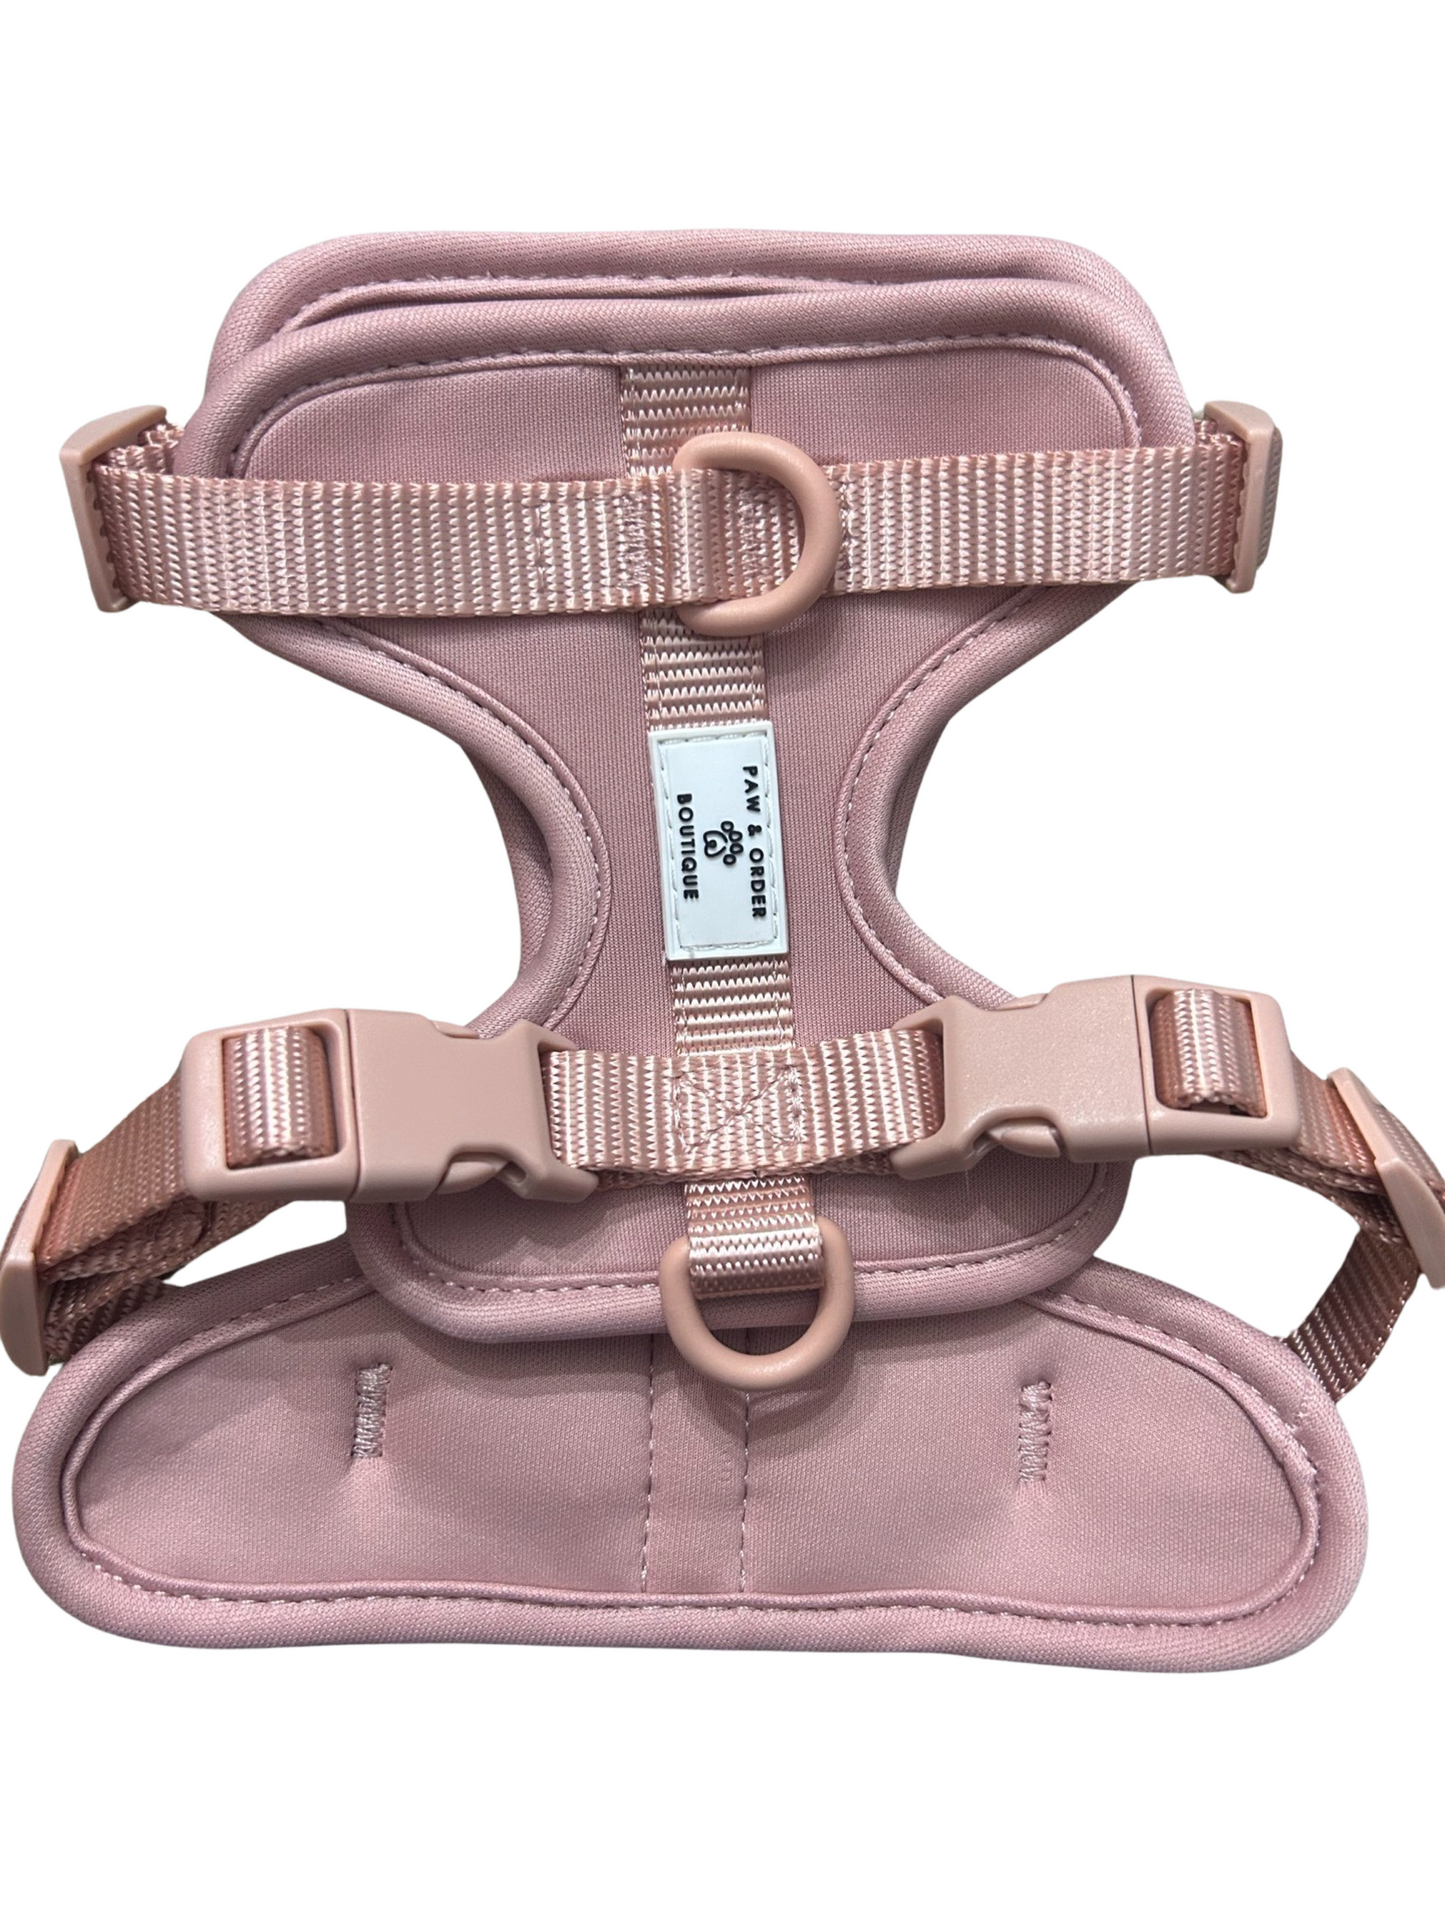 Paw & Order Boutique Harness (Pink)